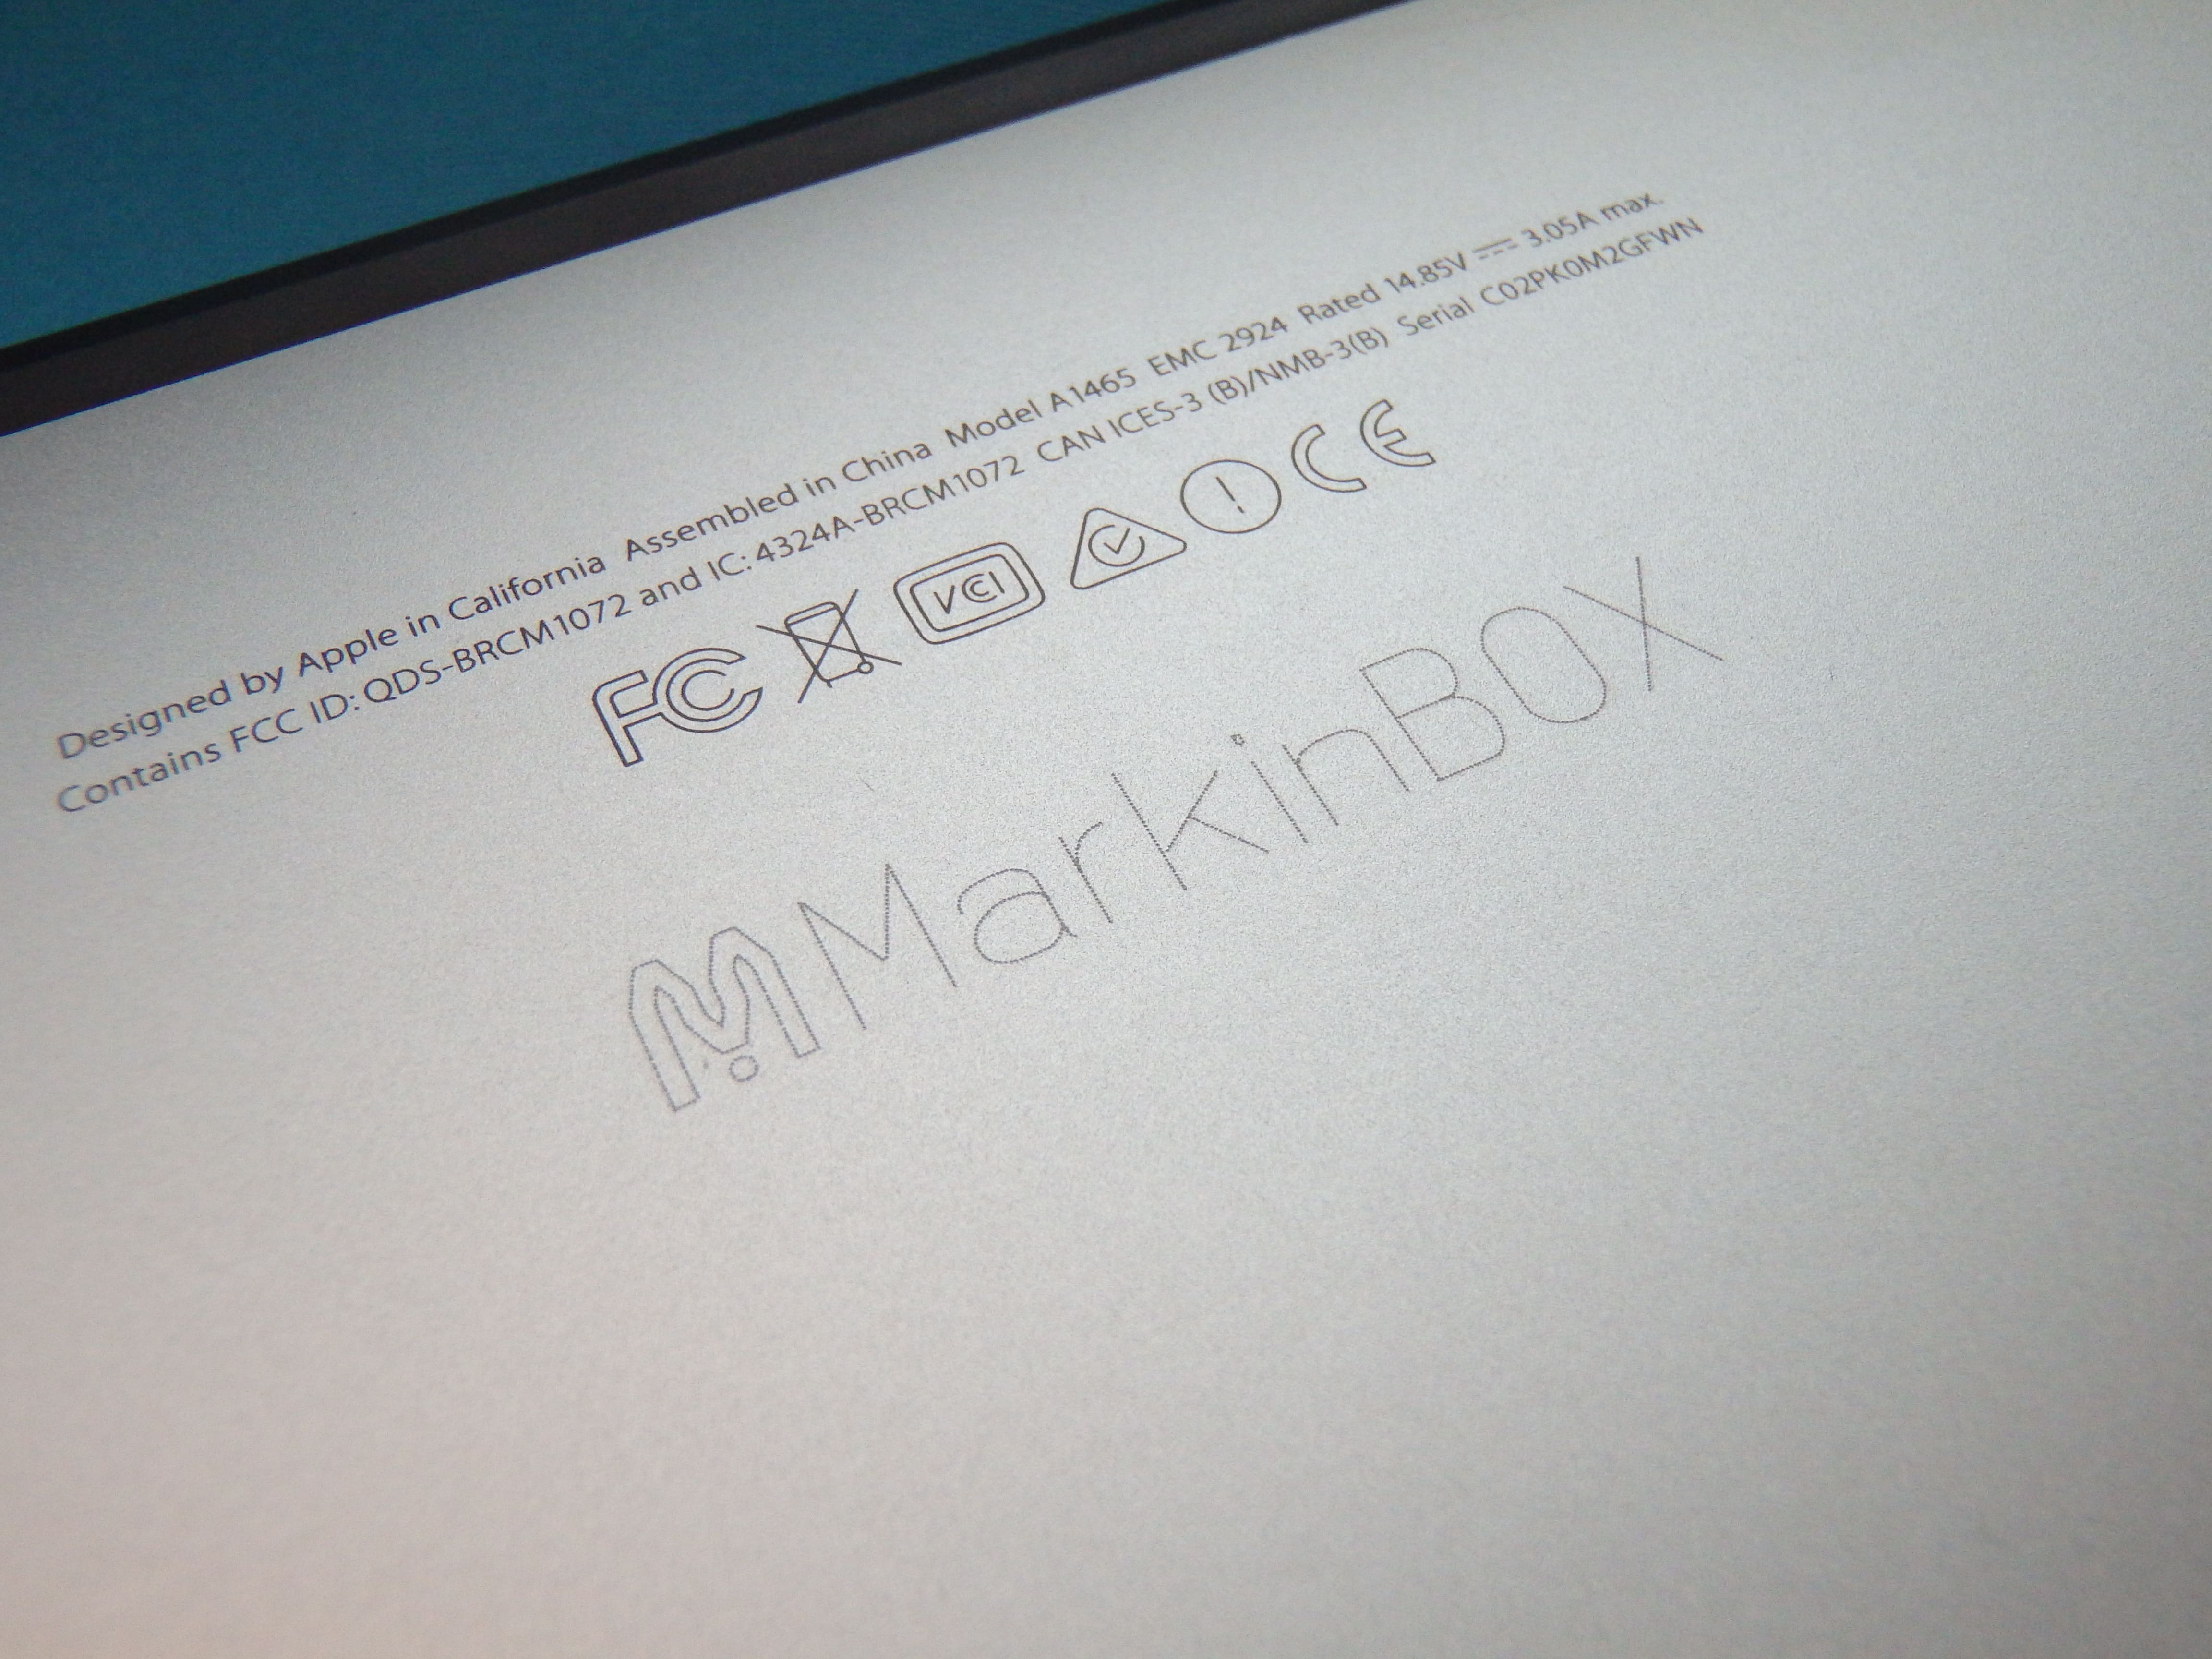 Image of the Computer's Back panel engraved with 'MarkinBOX' and logo, and text that reads 'Designed by Apple in California Assembled in China Model A 1465 EMC 2924 Rated 14.85V 3.05A max. Contains FCC ID: QDS-BRCM1072 and IC: 4324A-BRCM1072 CAN ICES-3 (B)/NMB-3(B) Serial C02PK0M2GFWN'